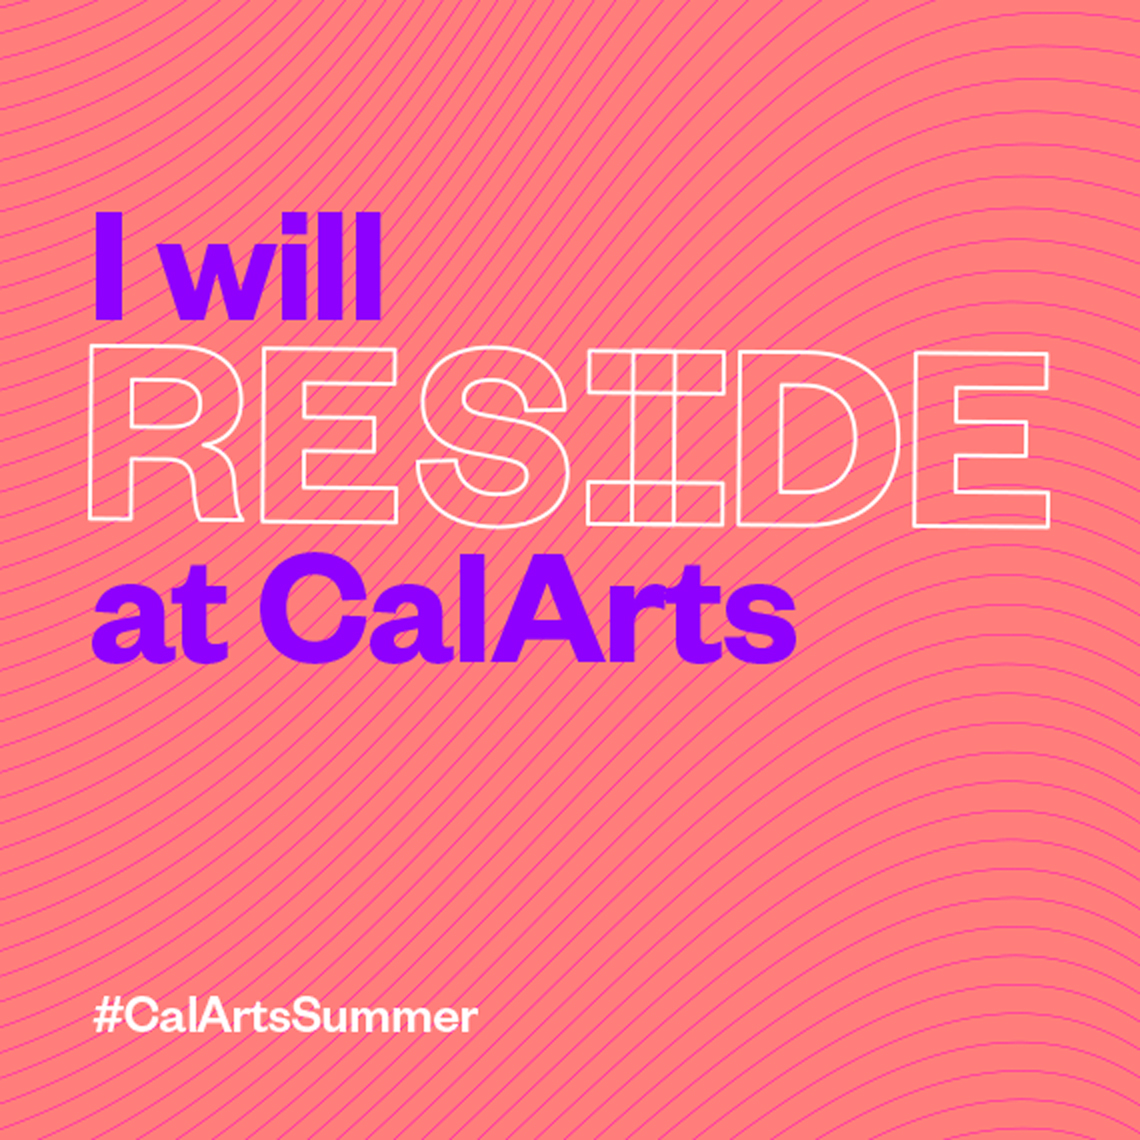 CalArts Reside summer residency campaign designed by Kilter